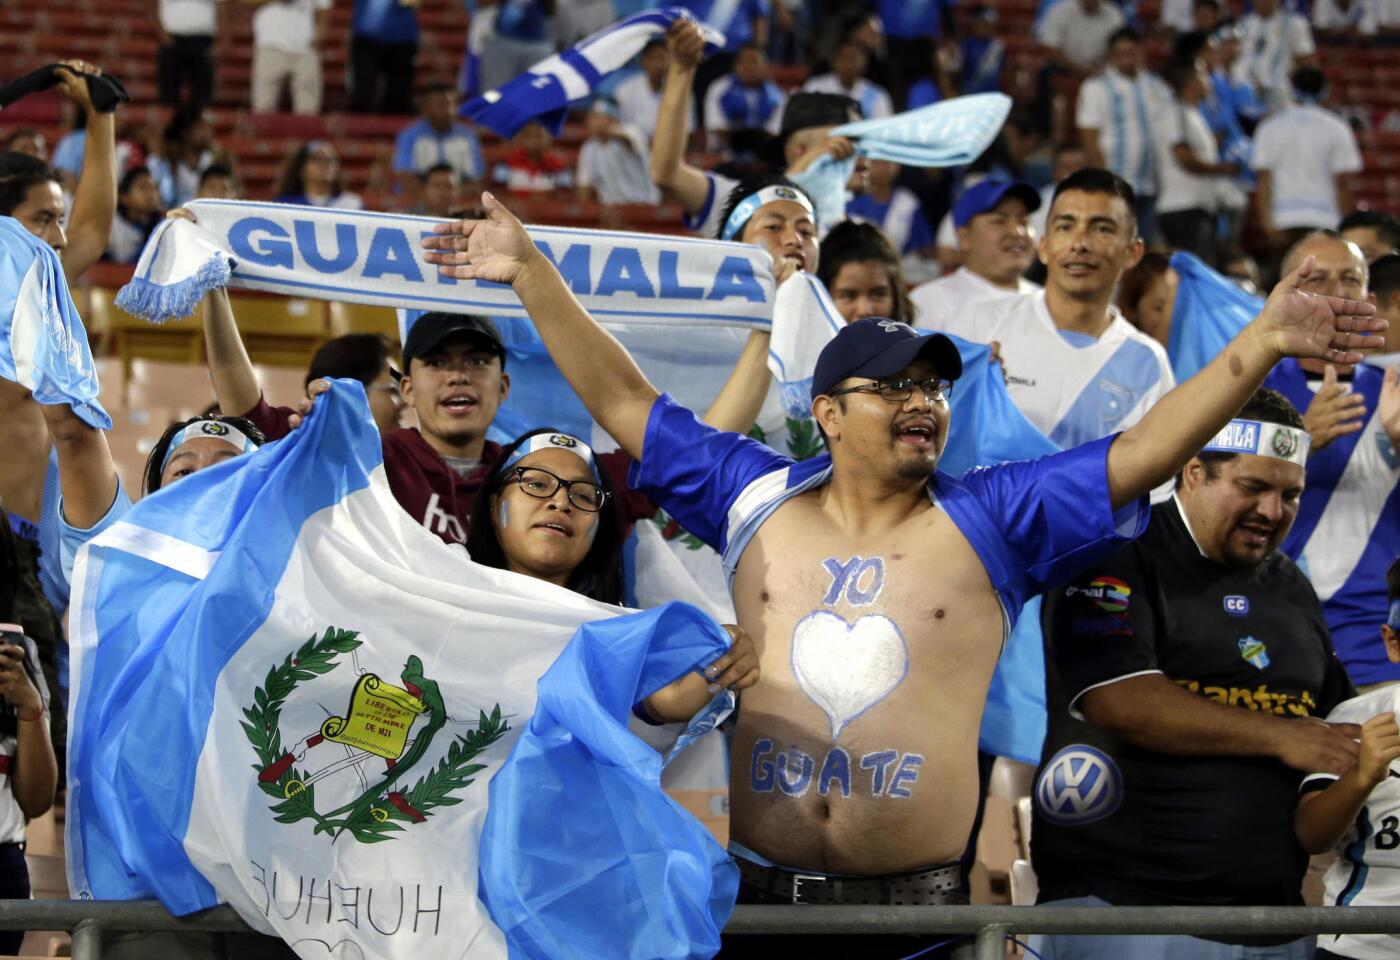 MAN06. Los Angeles (United States), 08/09/2018.- Guatemalan fans cheer on their team prior to the start of their international friendly match against Argentina at the Los Angeles Coliseum in Los Angeles, California, USA, 07 September 2018. (Futbol, Amistoso, Estados Unidos) EFE/EPA/MIKE NELSON ** Usable by HOY and SD Only **